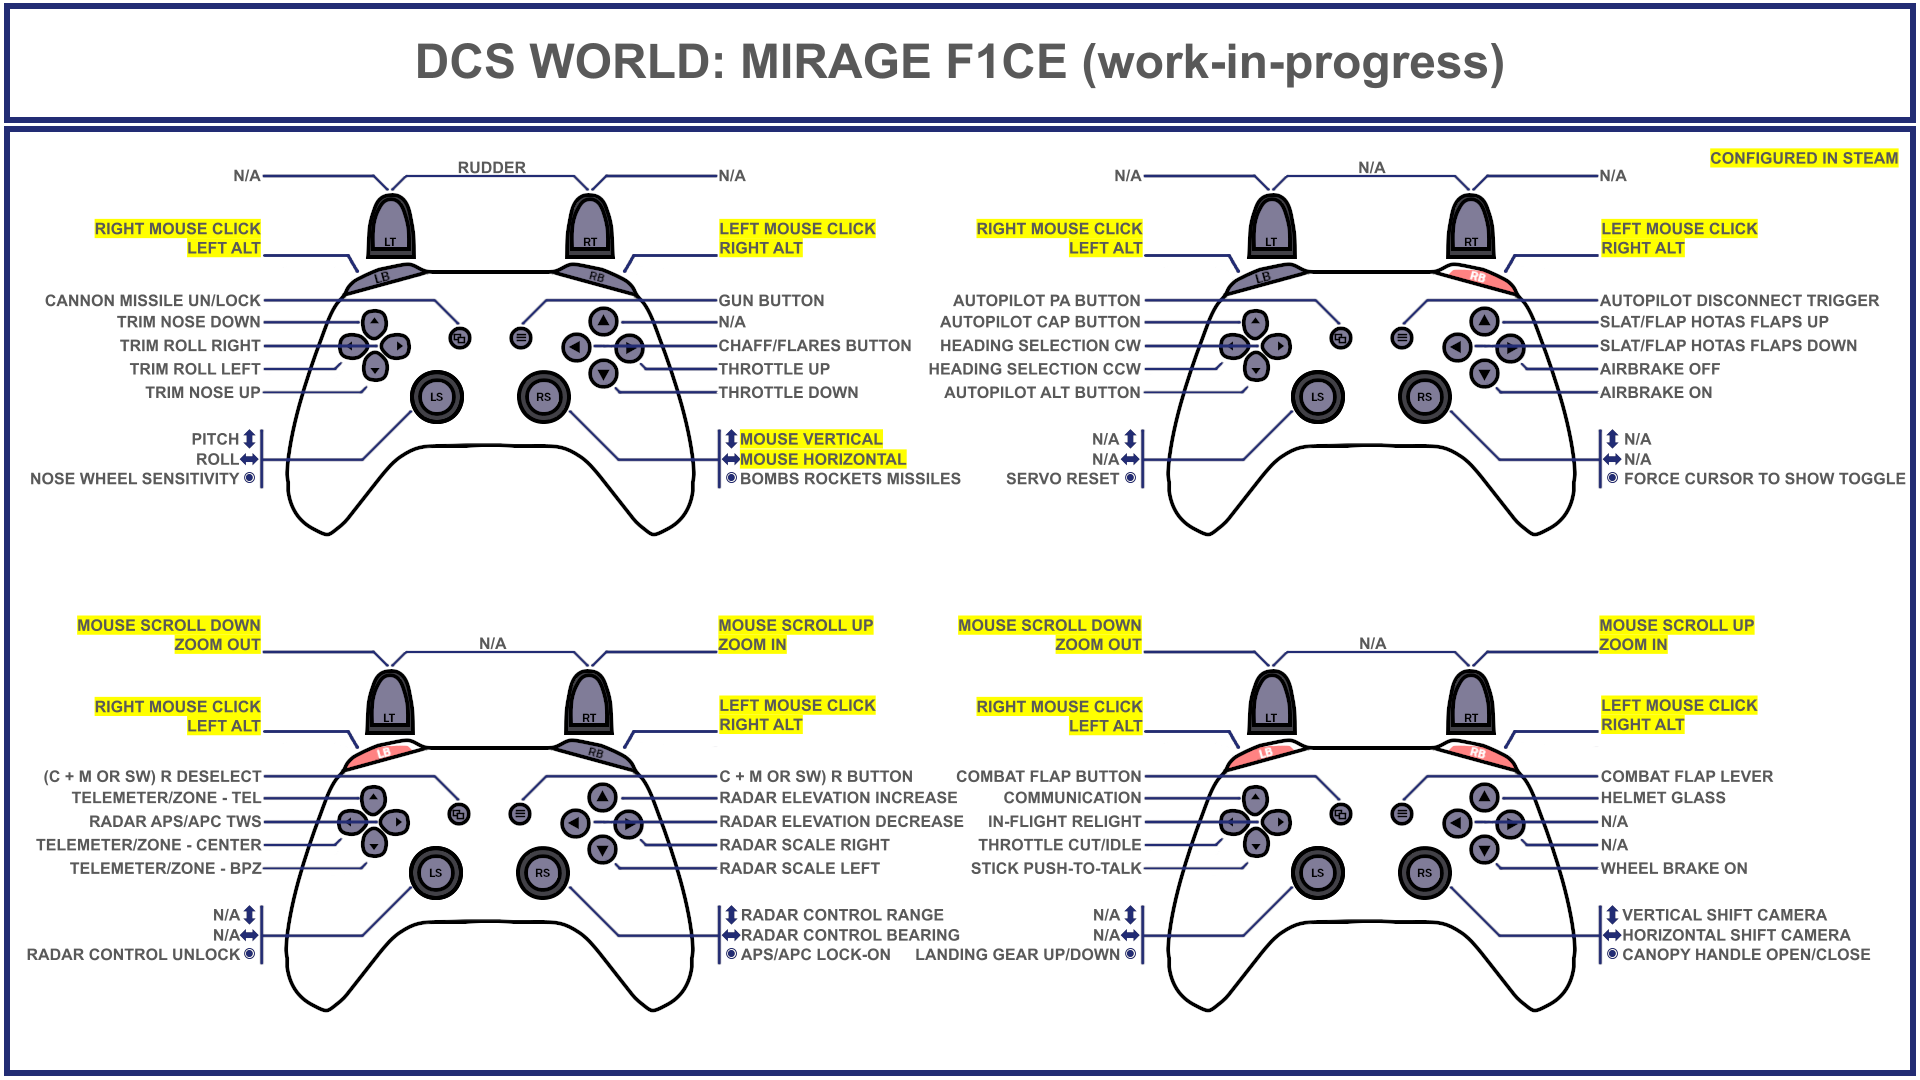 Tuuvas' Official Mirage F1CE (work-in-progress) Gamepad Controller Layout